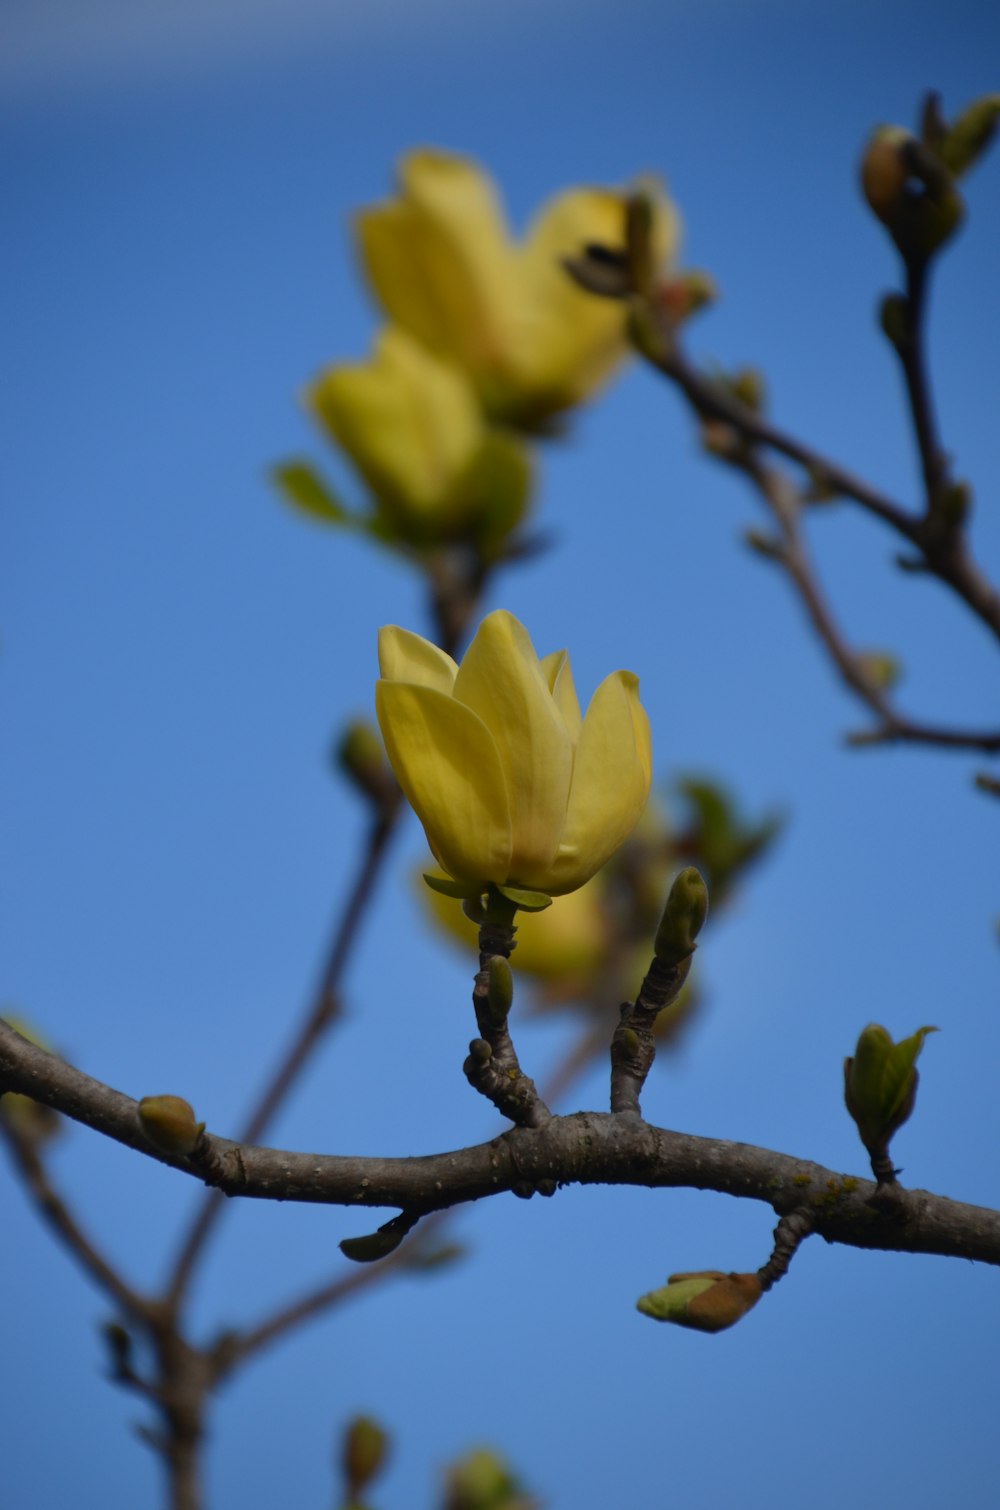 a yellow flower on a tree branch with a blue sky in the background